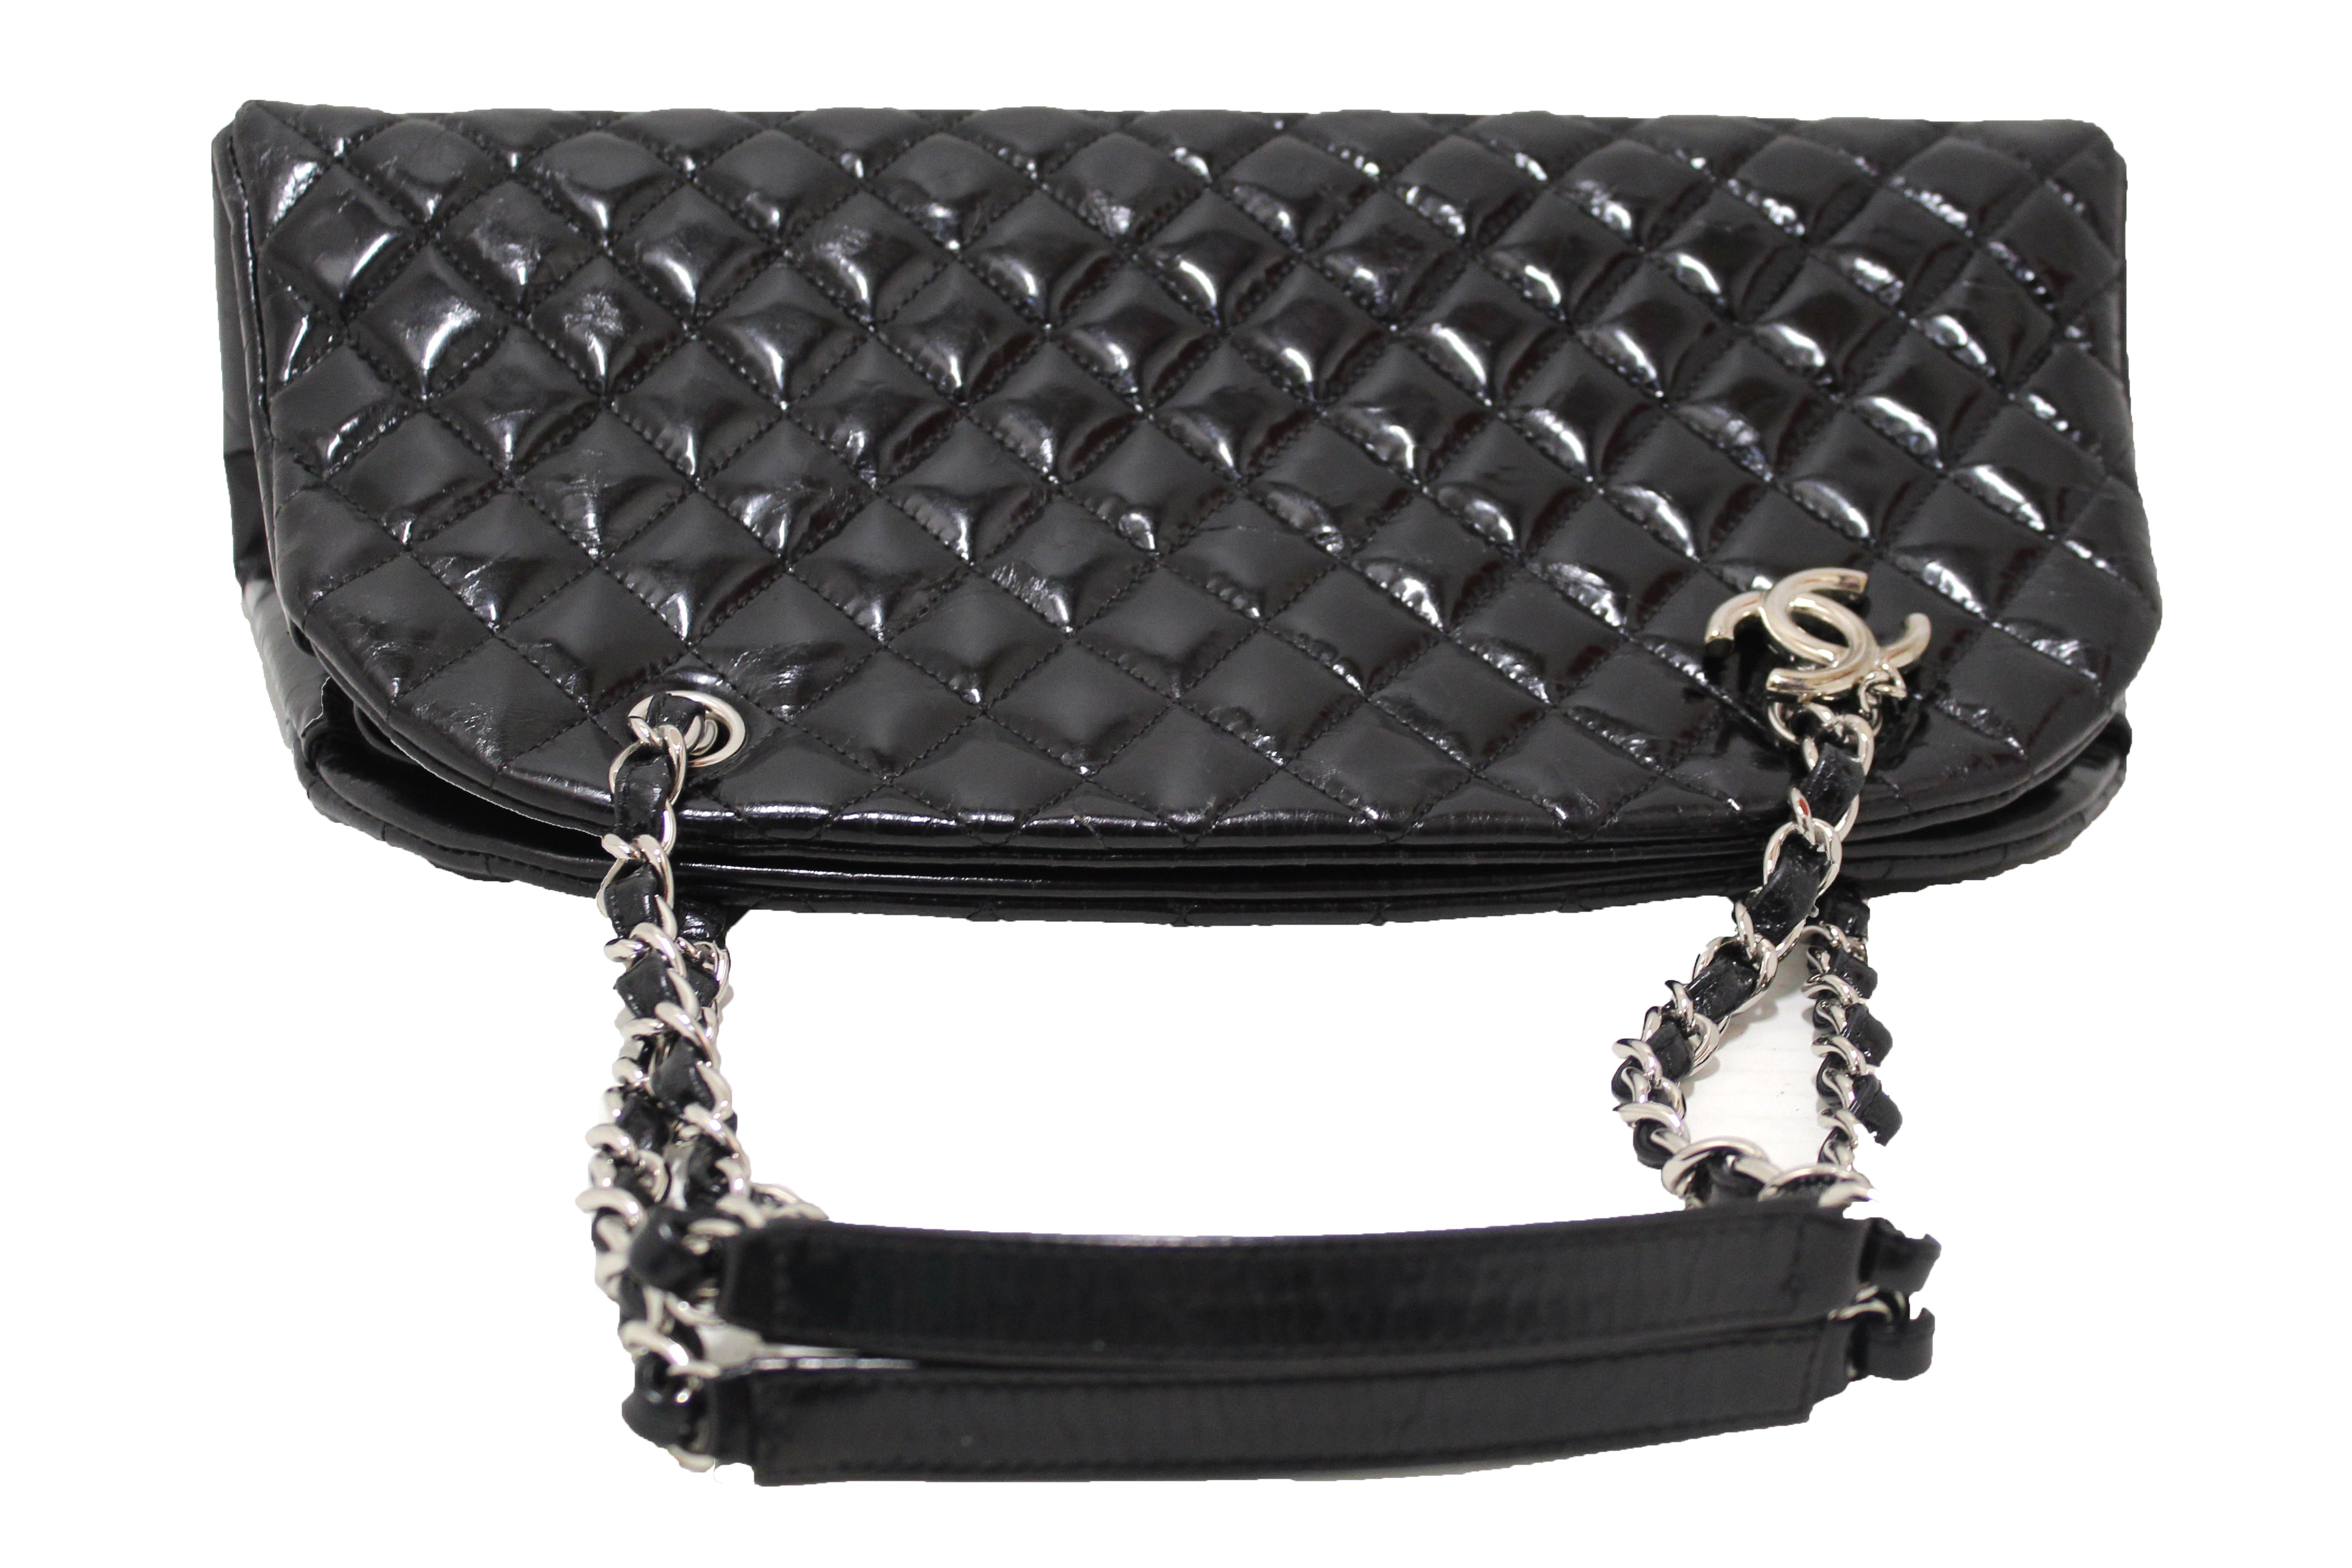 A BLACK PATENT LEATHER JUST MADEMOISELLE BAG WITH SILVER HARDWARE